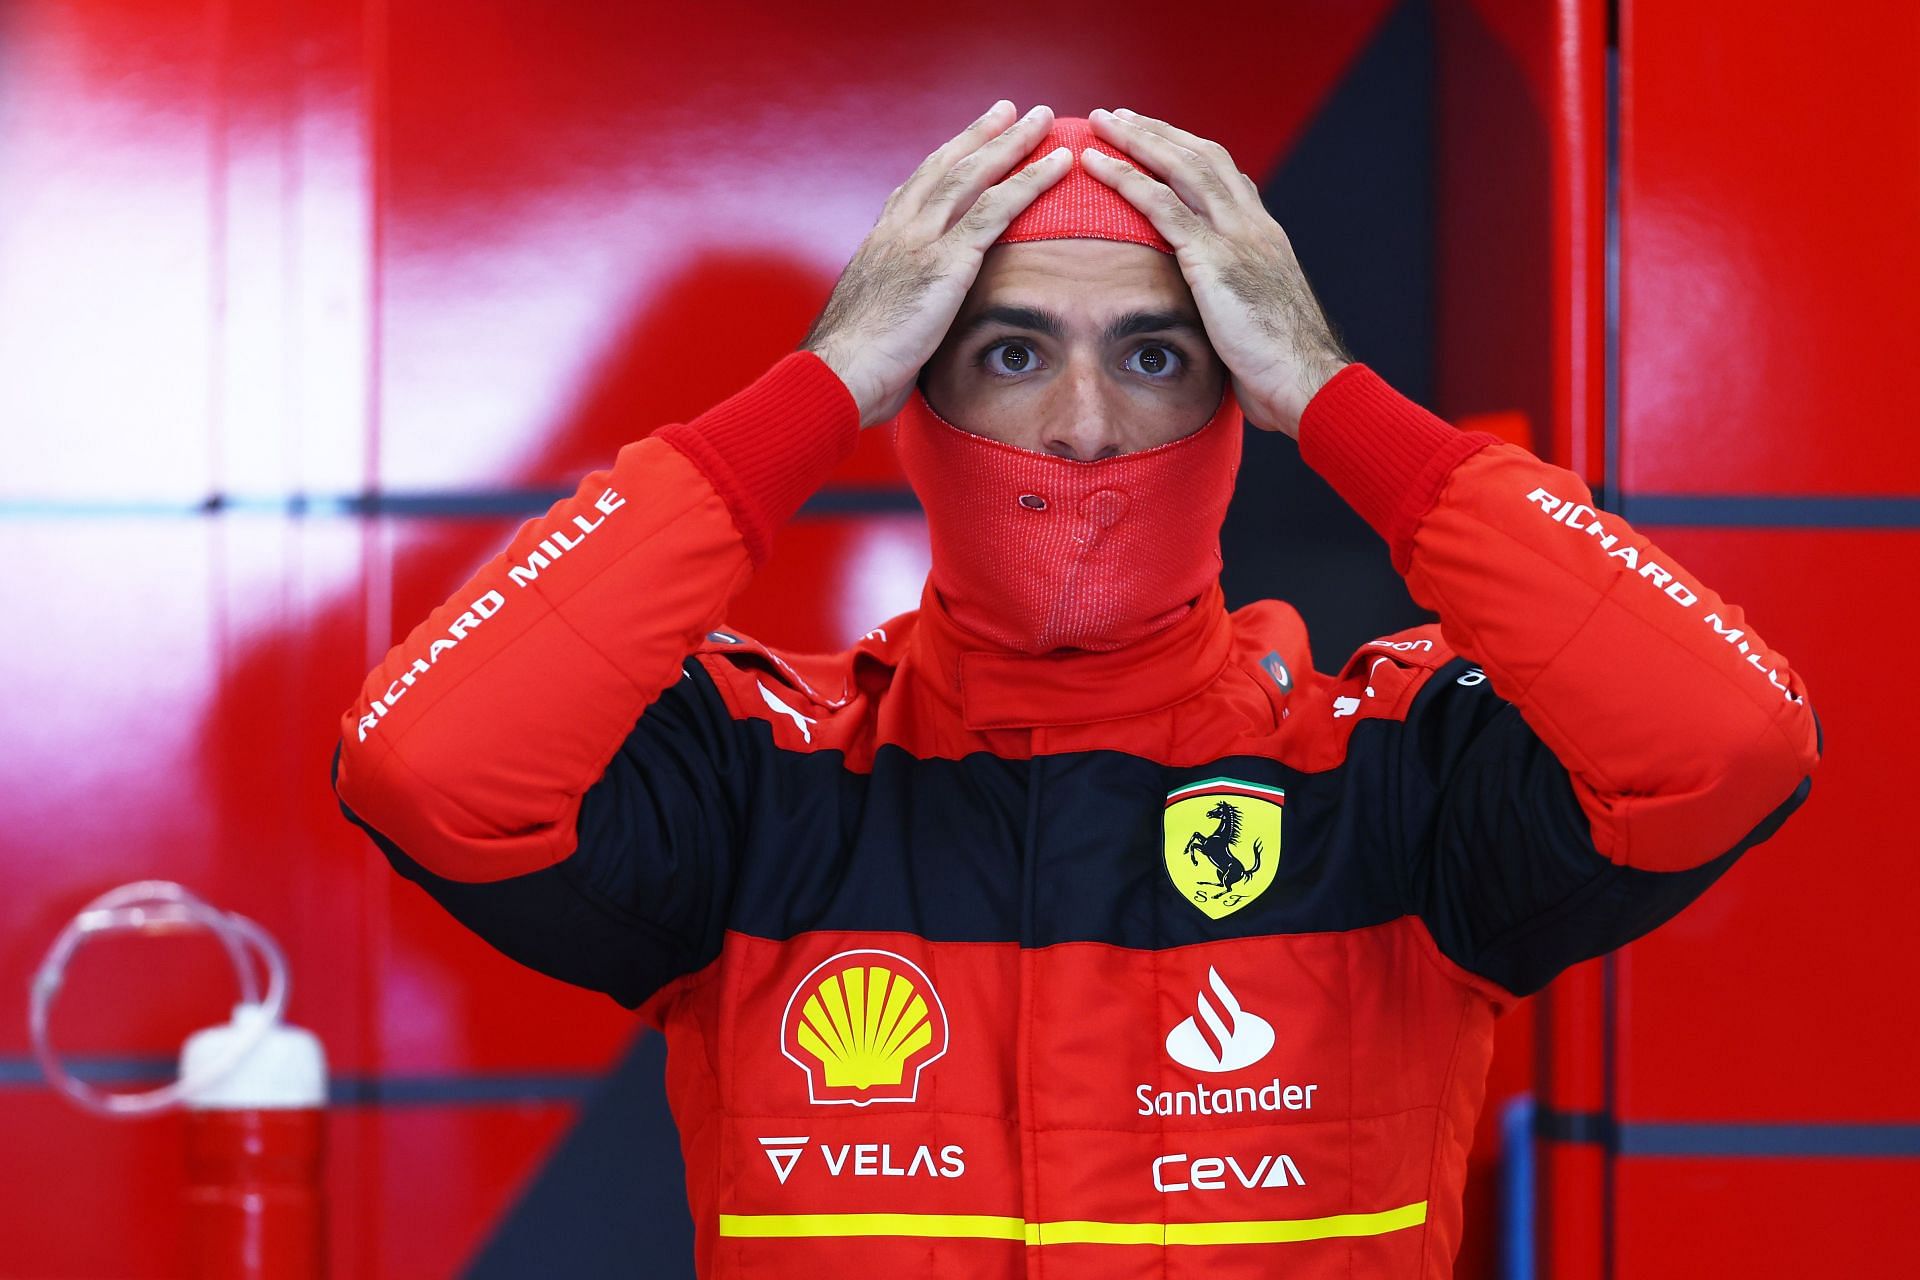 Ferrari driver Carlos Sainz prepares for the first practice session at the 2022 Saudi Arabian GP in Jeddah (Photo by Lars Baron/Getty Images)